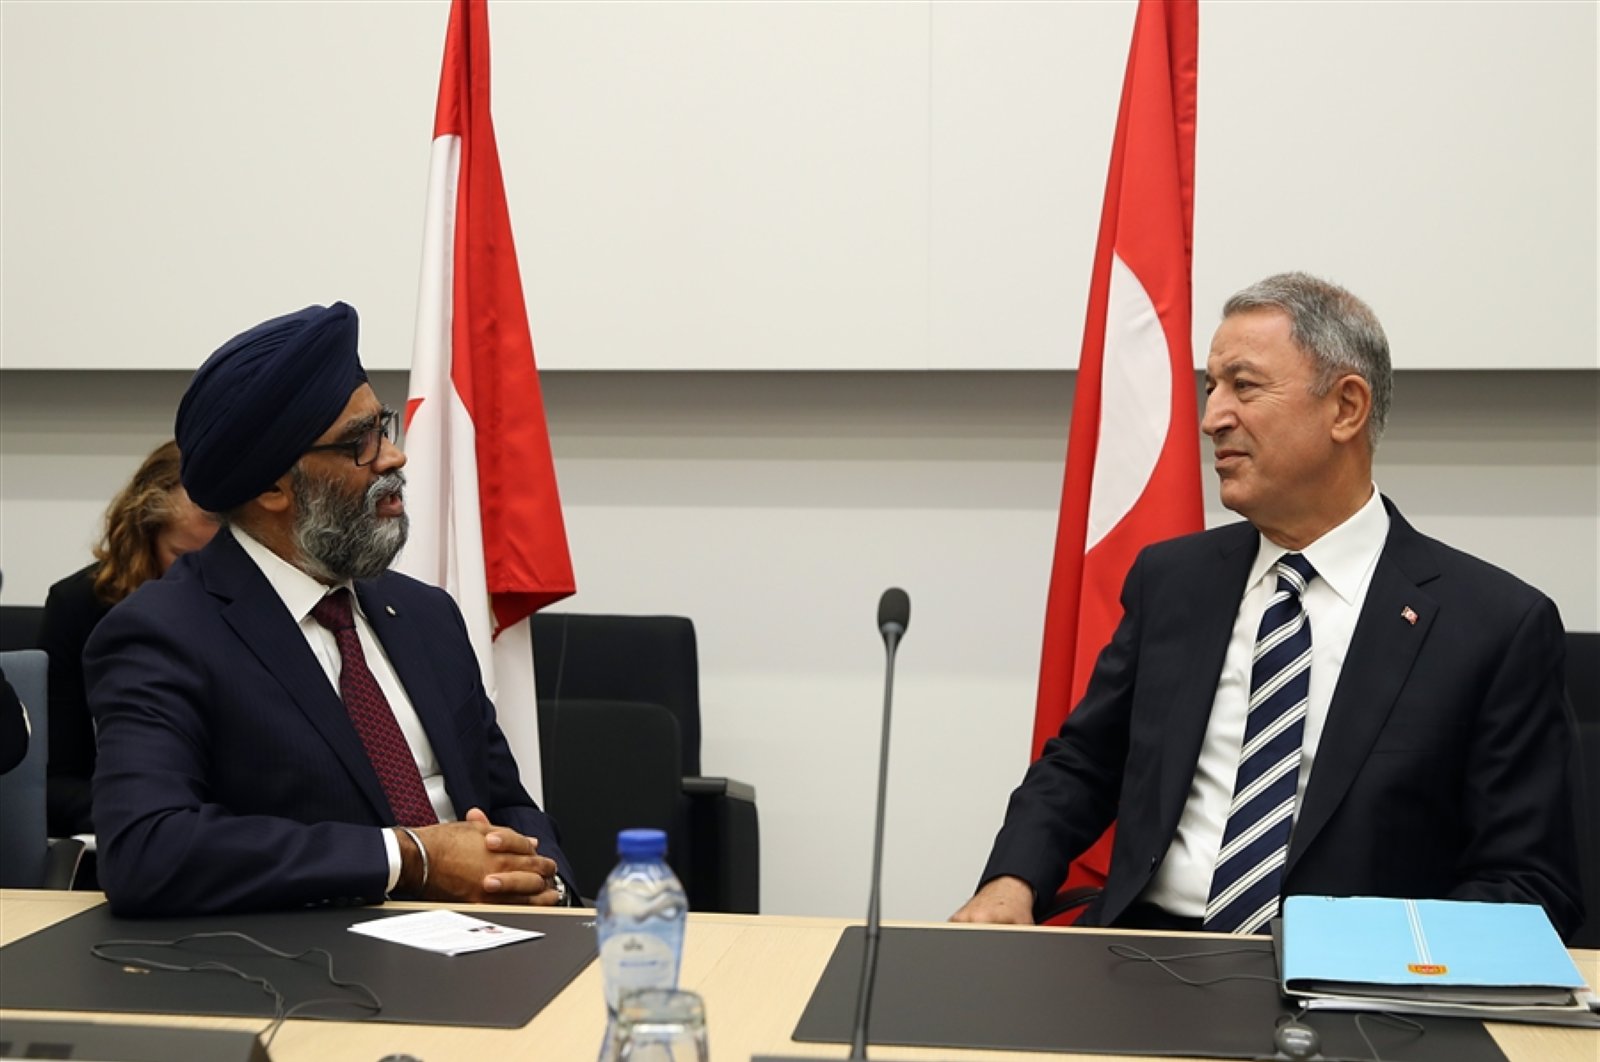 Defense Minister Hulusi Akar (R) speaks with Canadian counterpart Harjit Sajjan in this undated file photo. (Turkish Defense Ministry Handout)